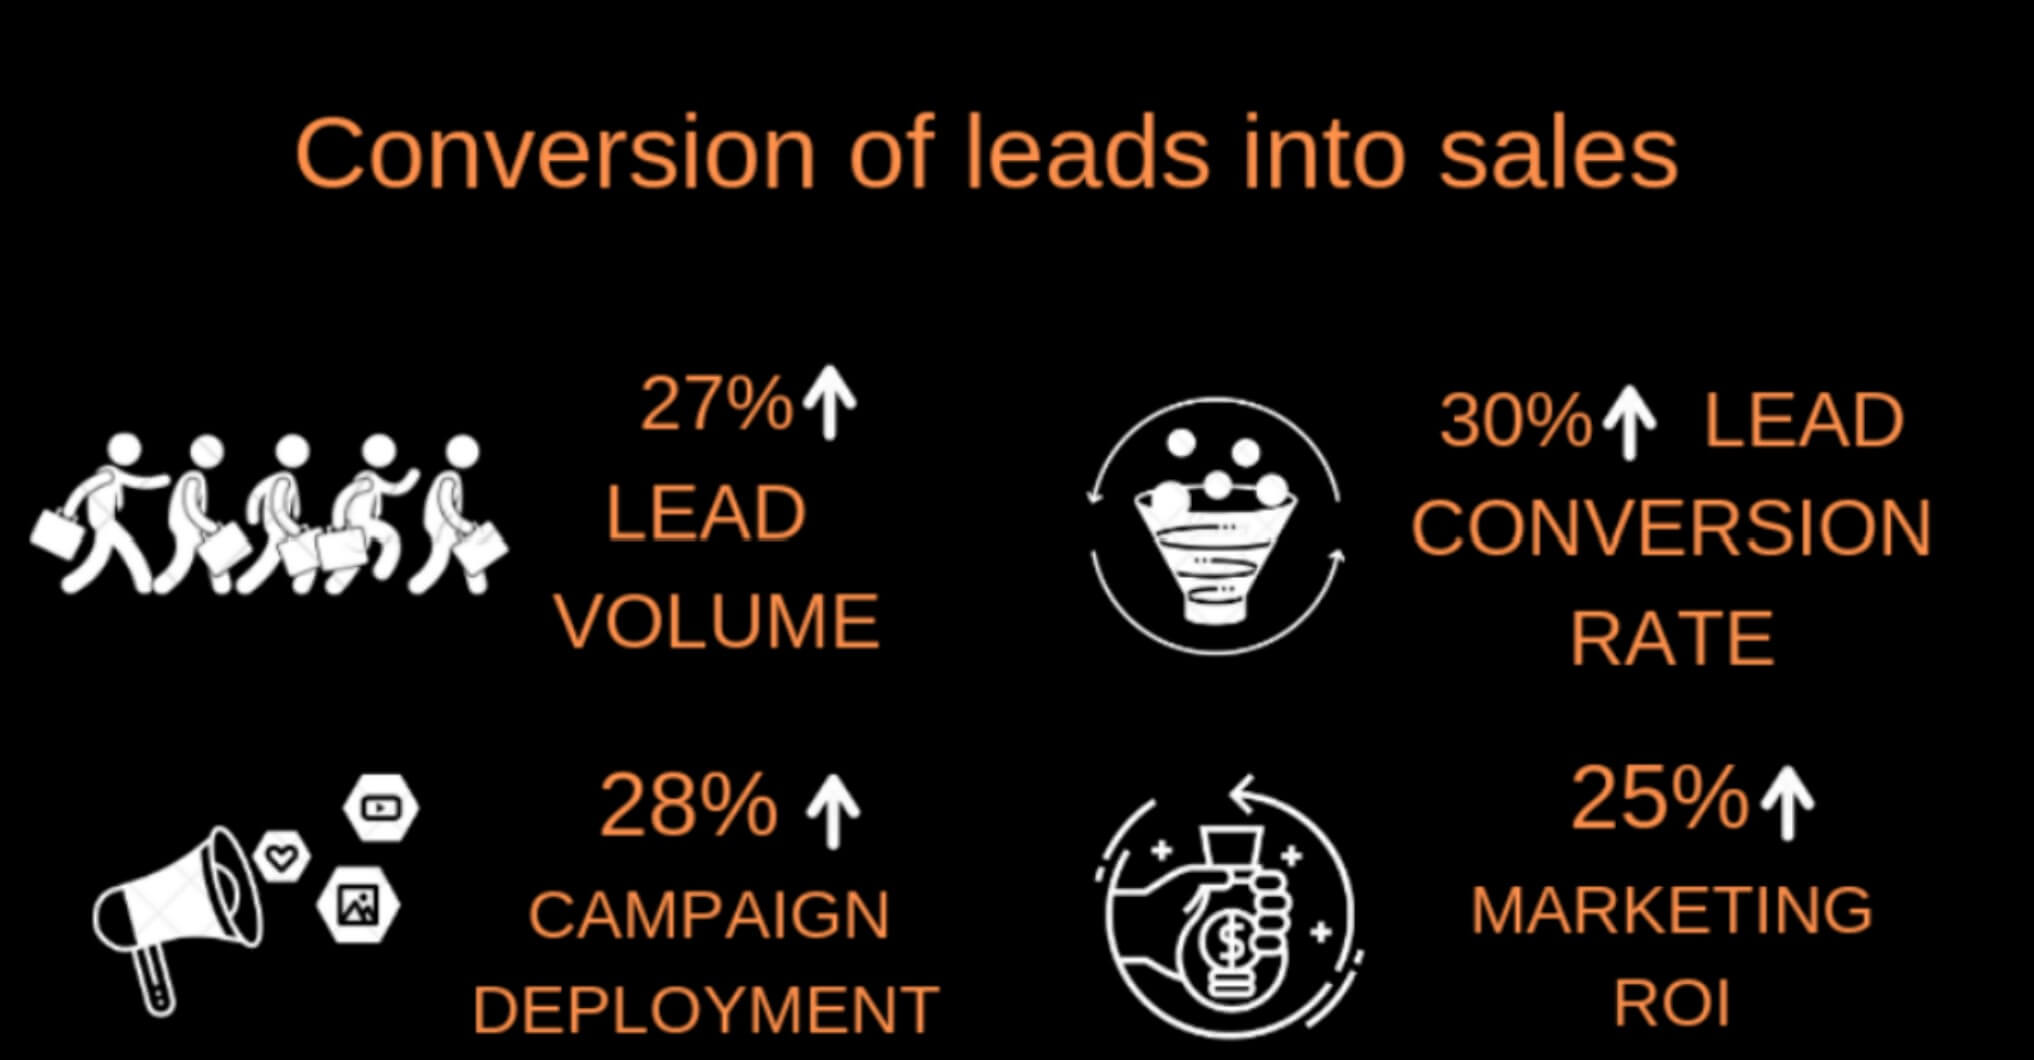 27% increase leads, 28% increase campaign deployment, 30% increase conversions, 25% increase marketing ROI